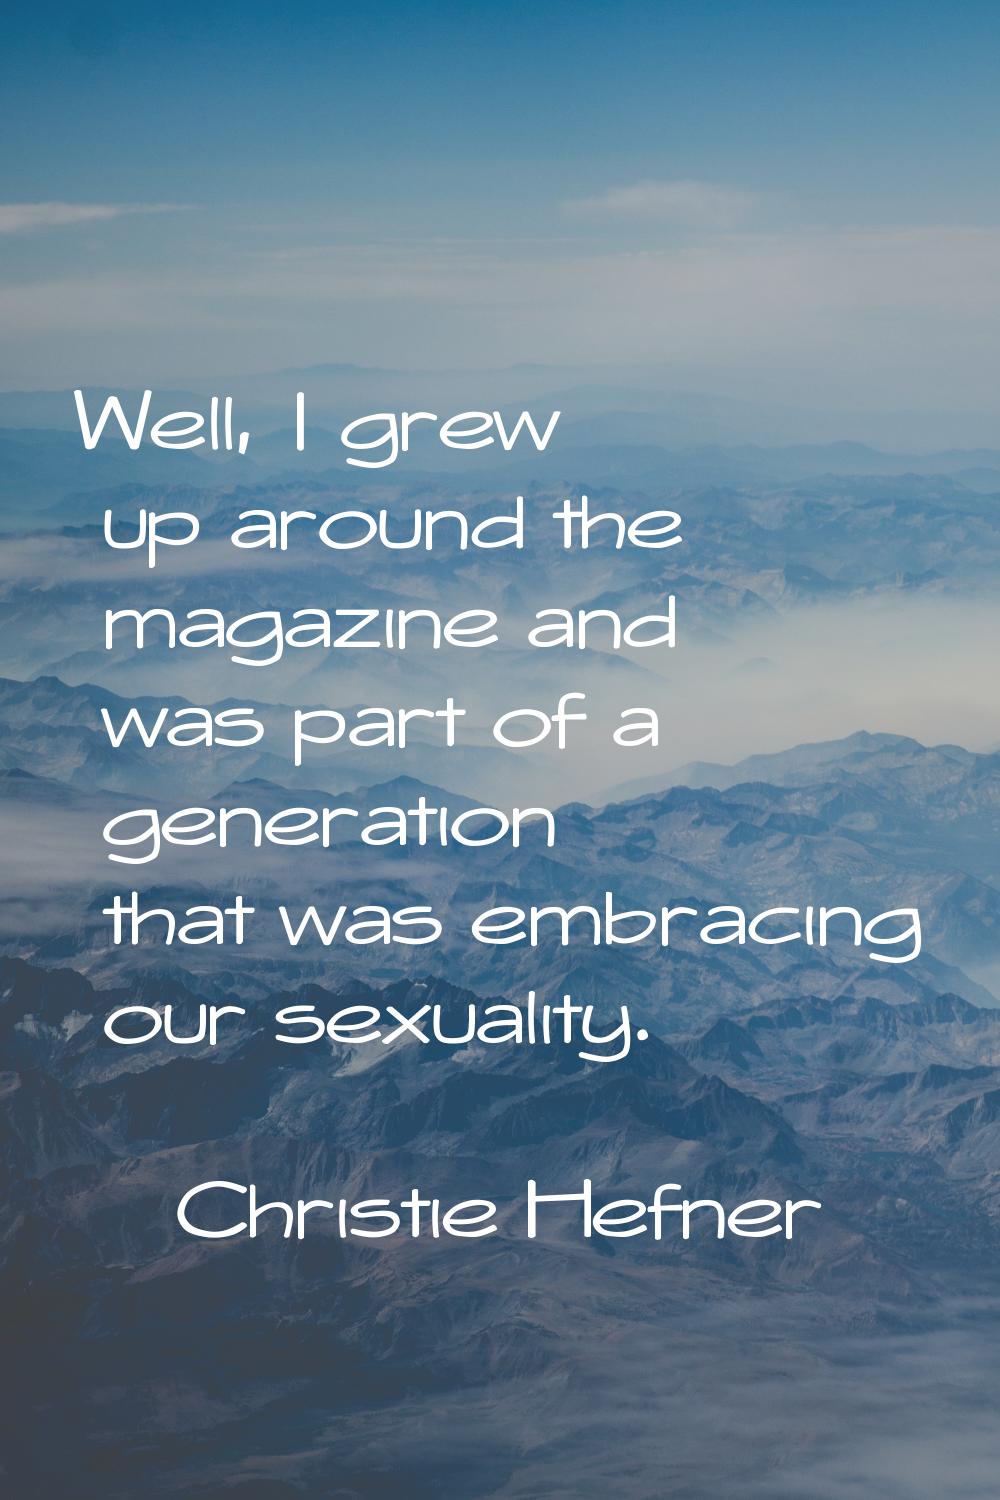 Well, I grew up around the magazine and was part of a generation that was embracing our sexuality.